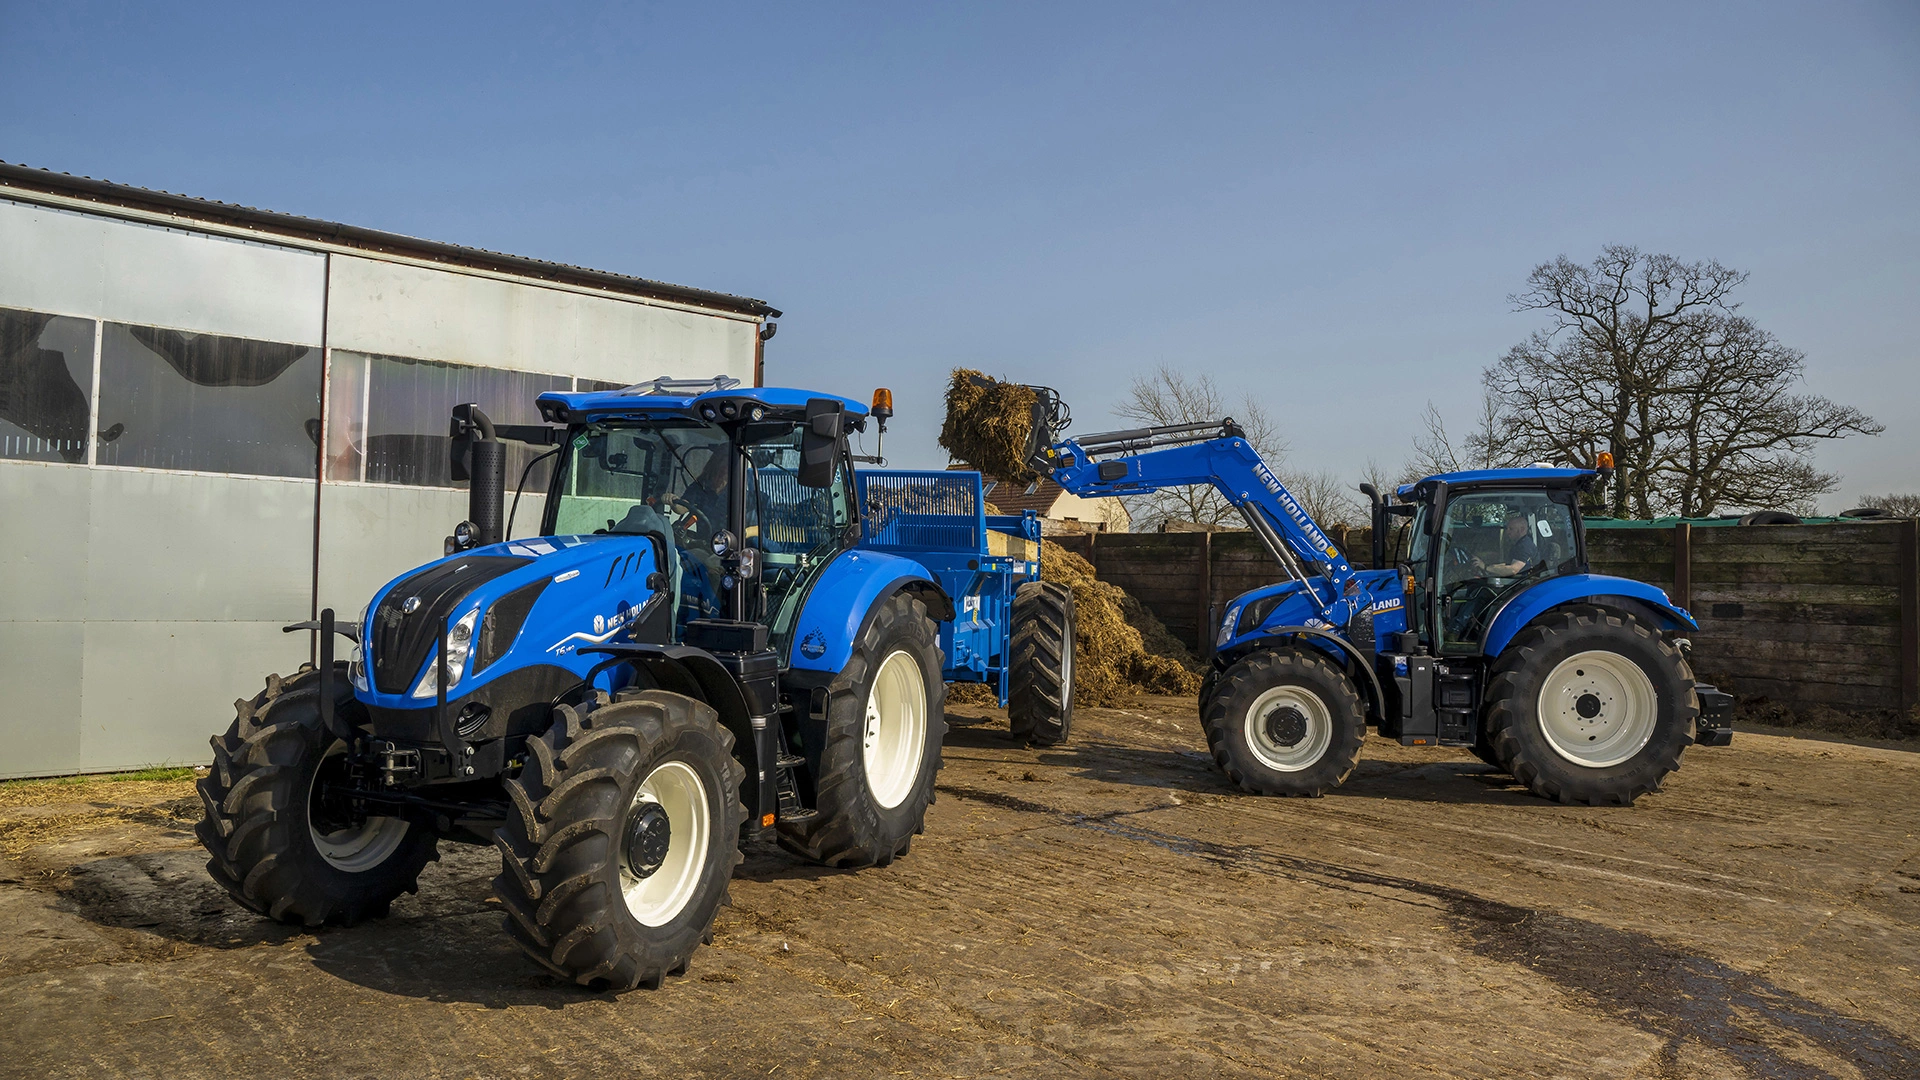 Two New Holland tractors, one with a front loader carrying manure, at a rural farmstead.